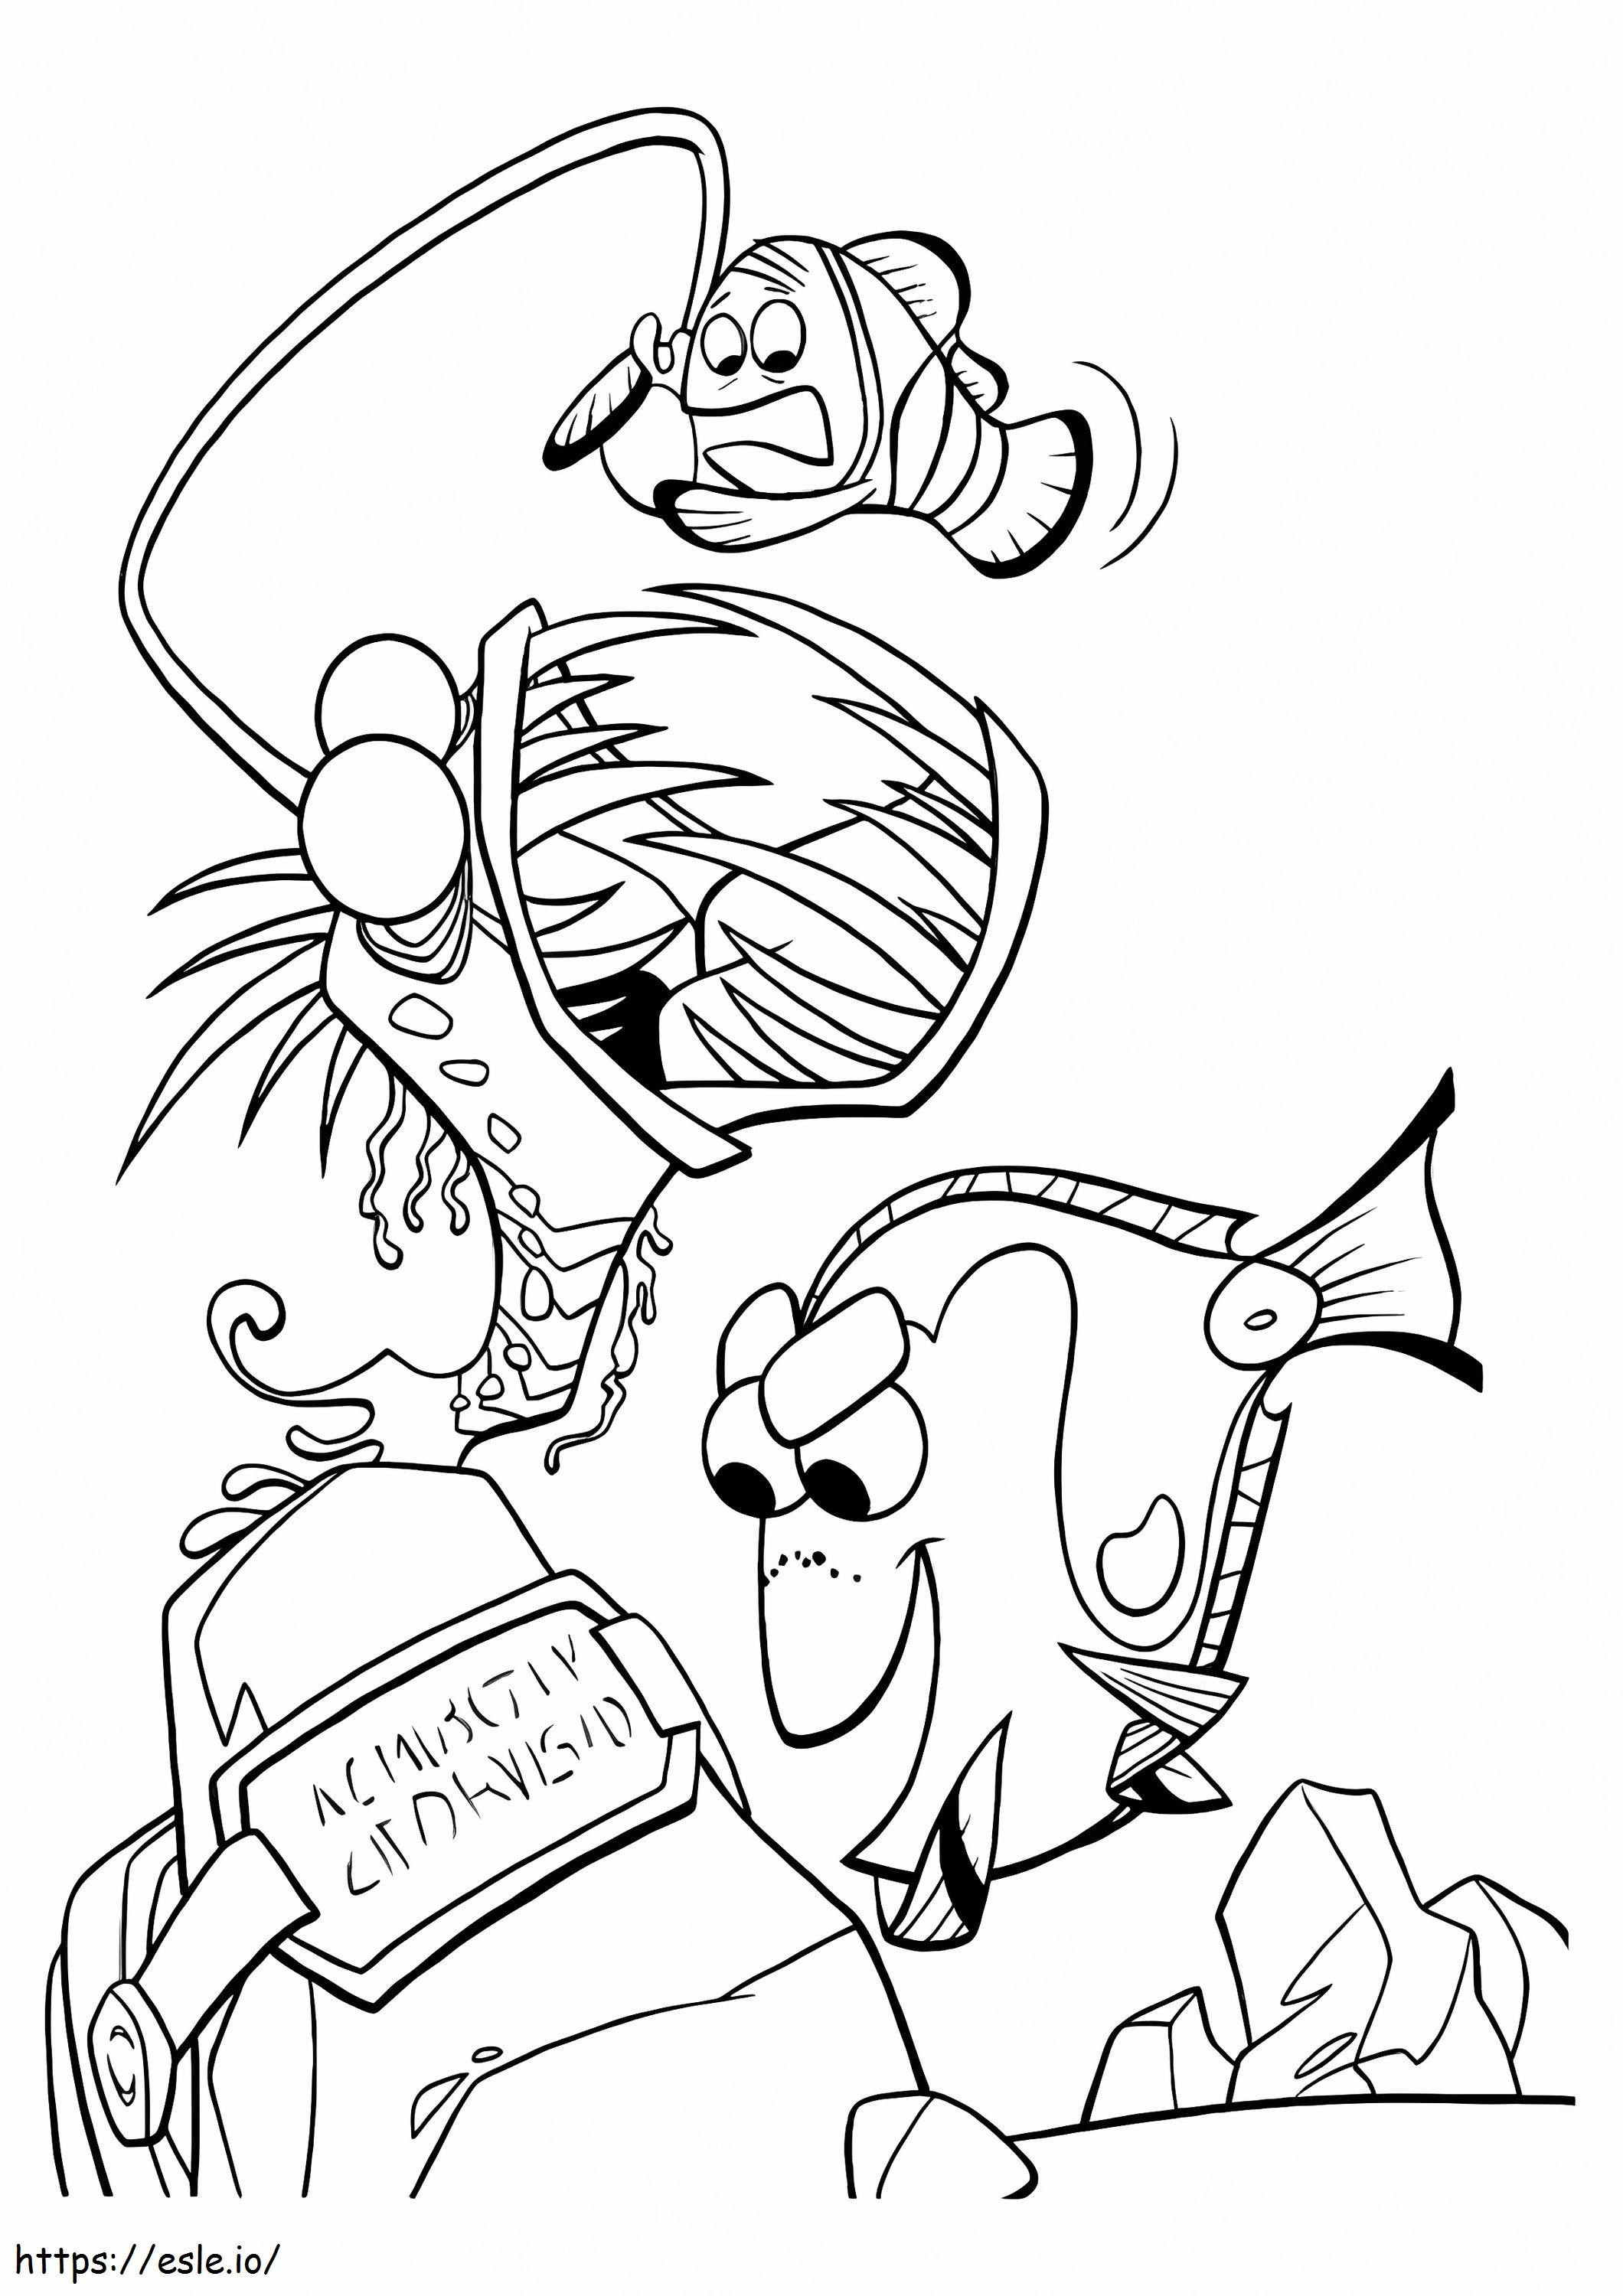 1530670574 Marlin In Danger A4 coloring page